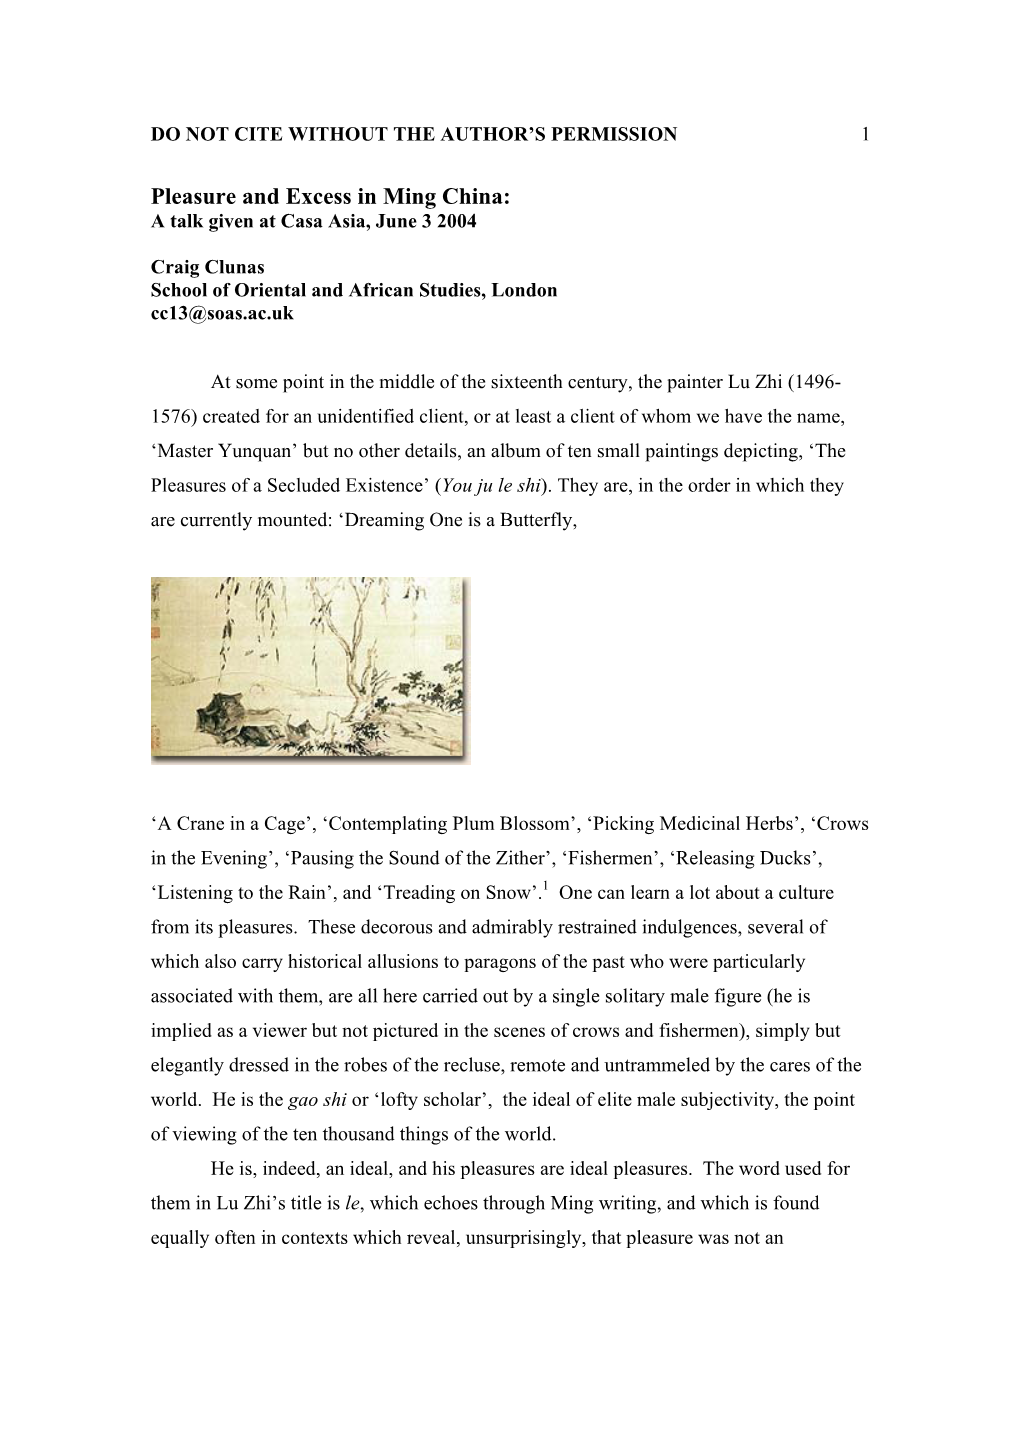 Pleasure and Excess in Ming China: a Talk Given at Casa Asia, June 3 2004